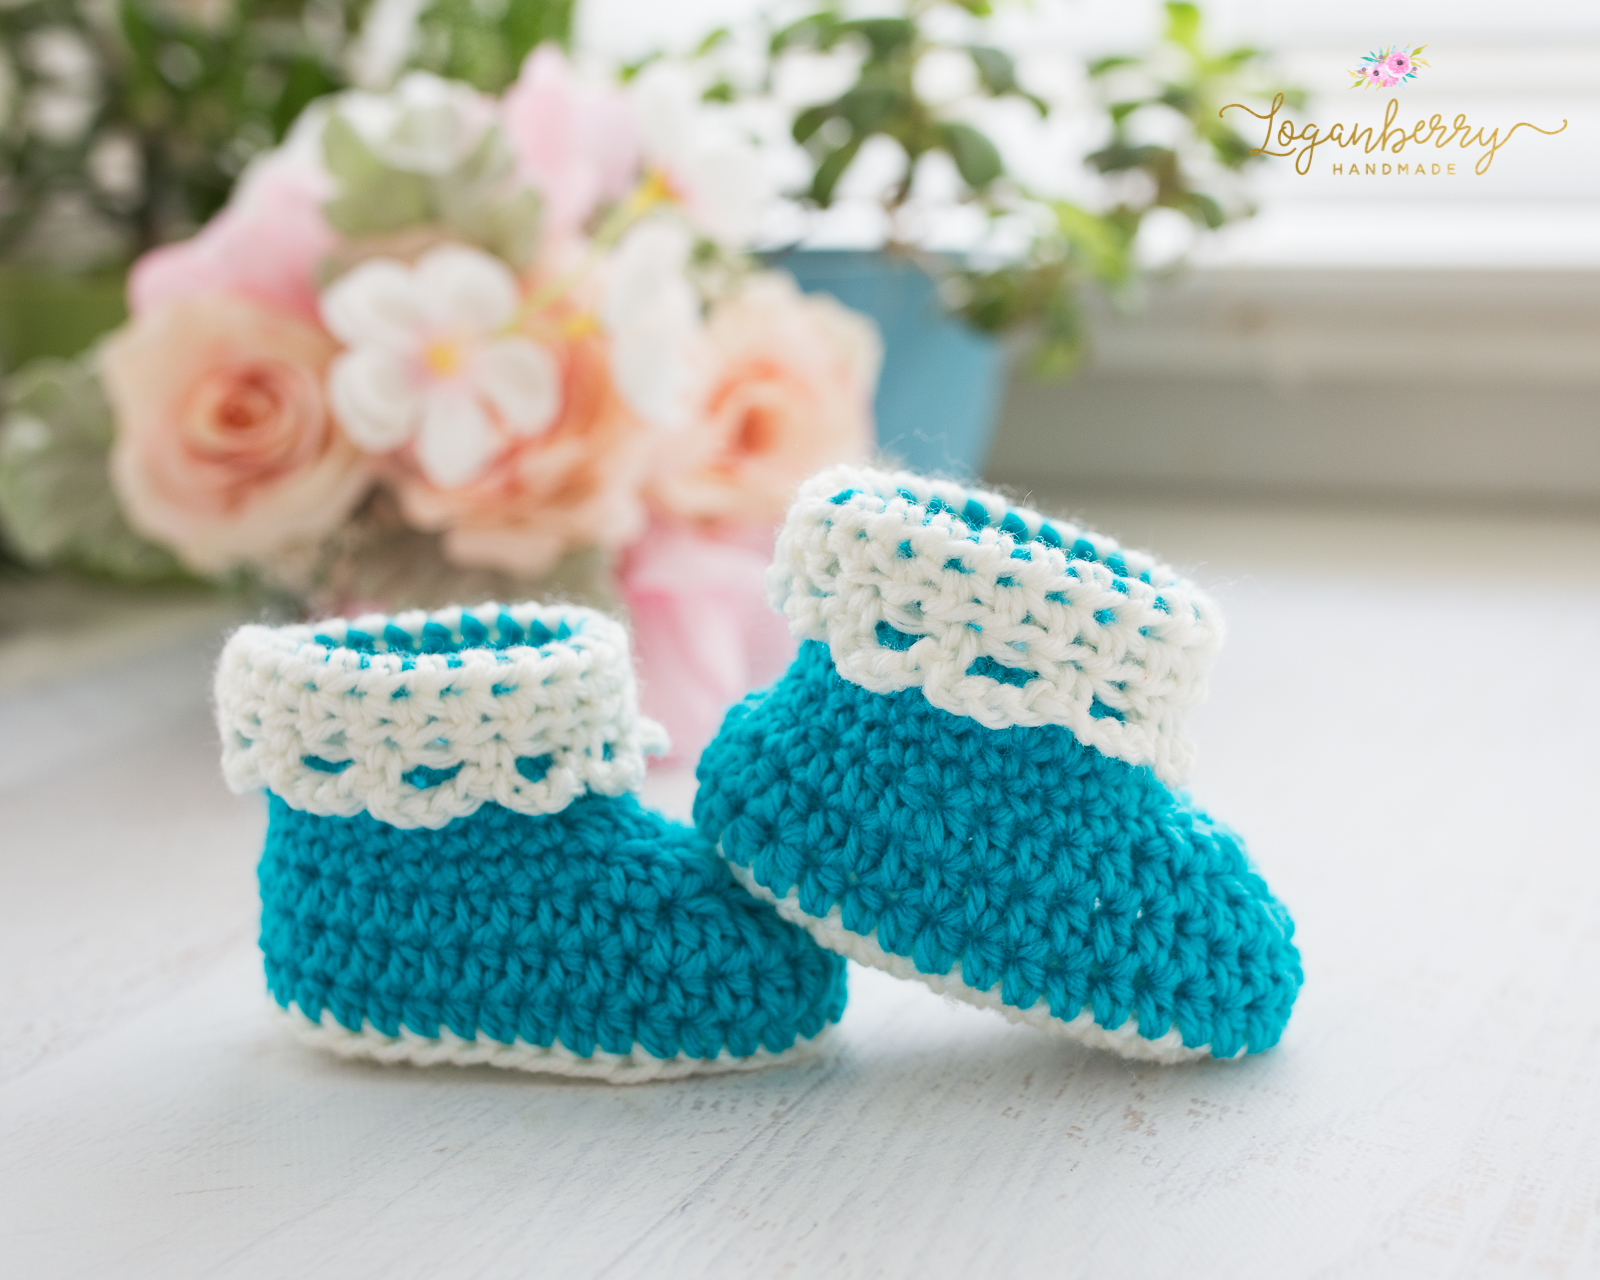 lace-trim-baby-booties-free-crochet-pattern-loganberry-handmade